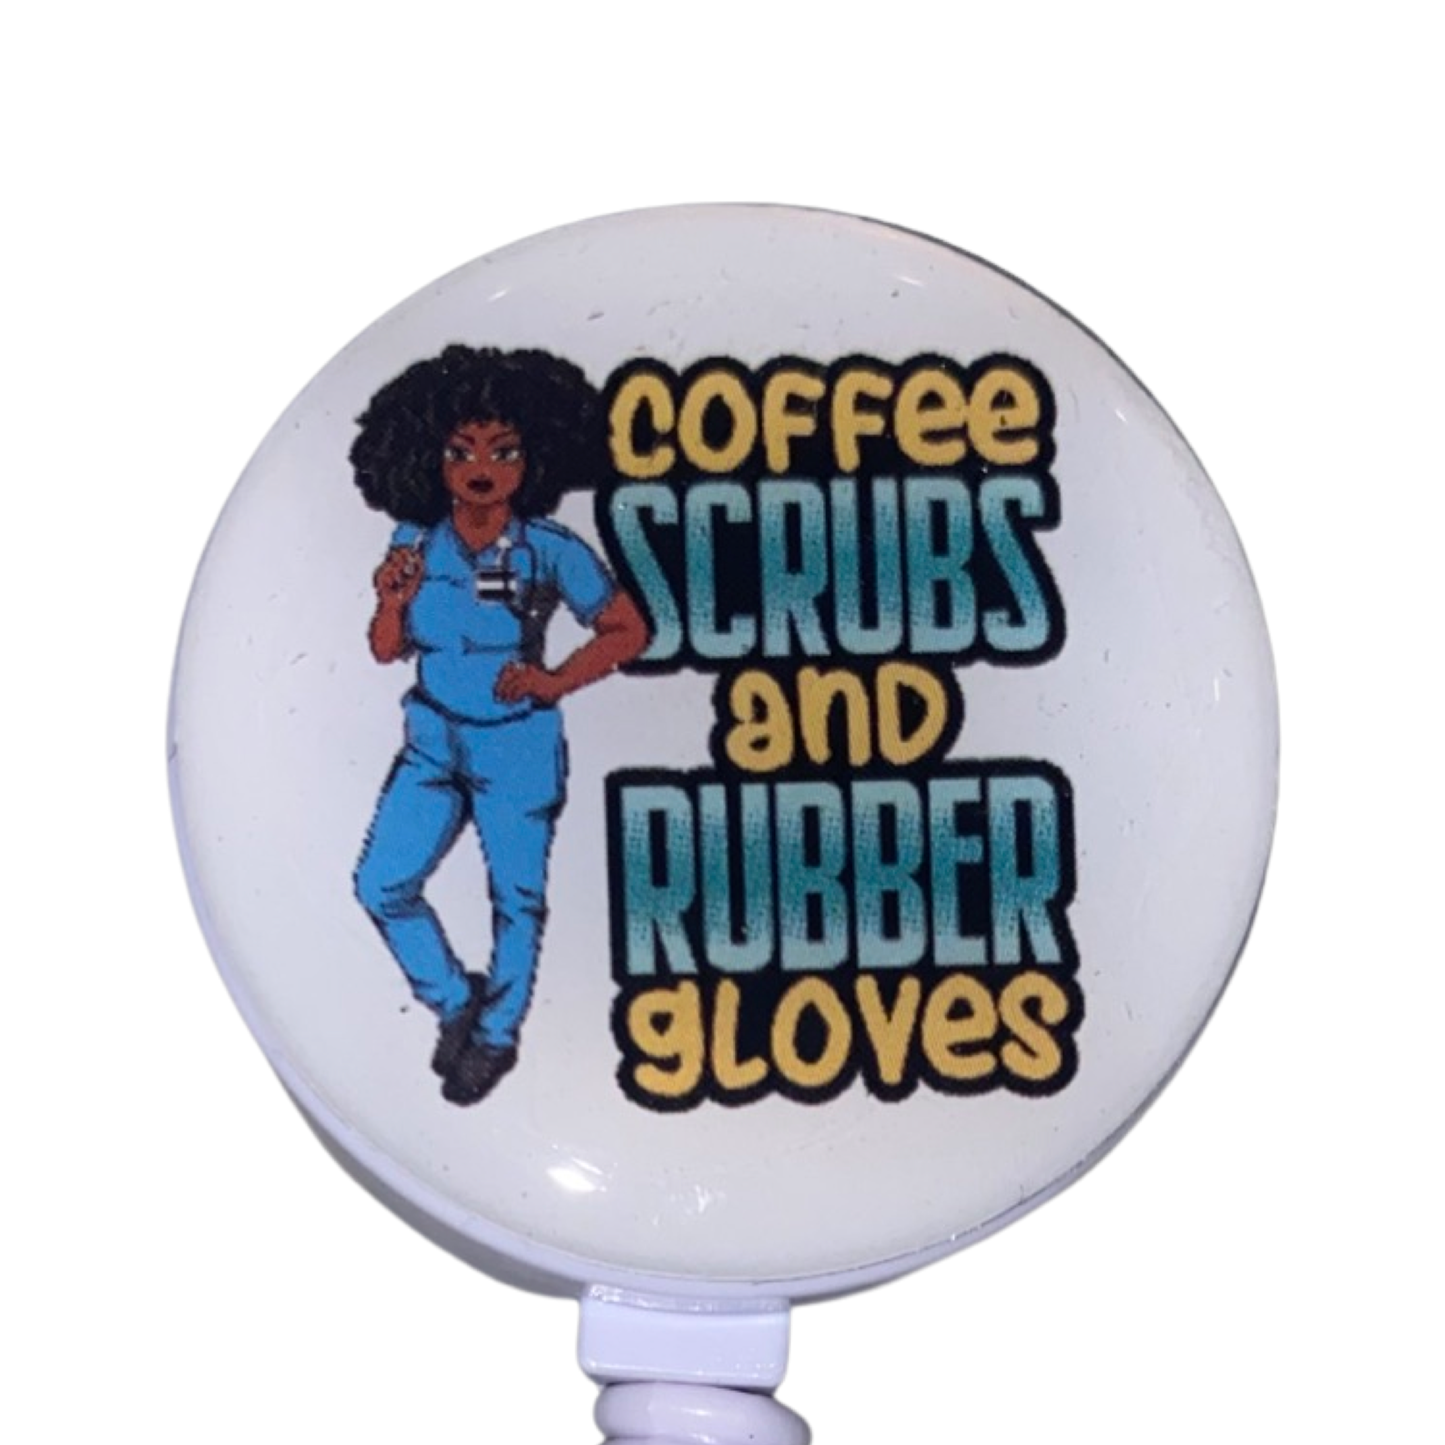 Coffee, Scrubs and Rubber Gloves Badge Reel Badge Holder